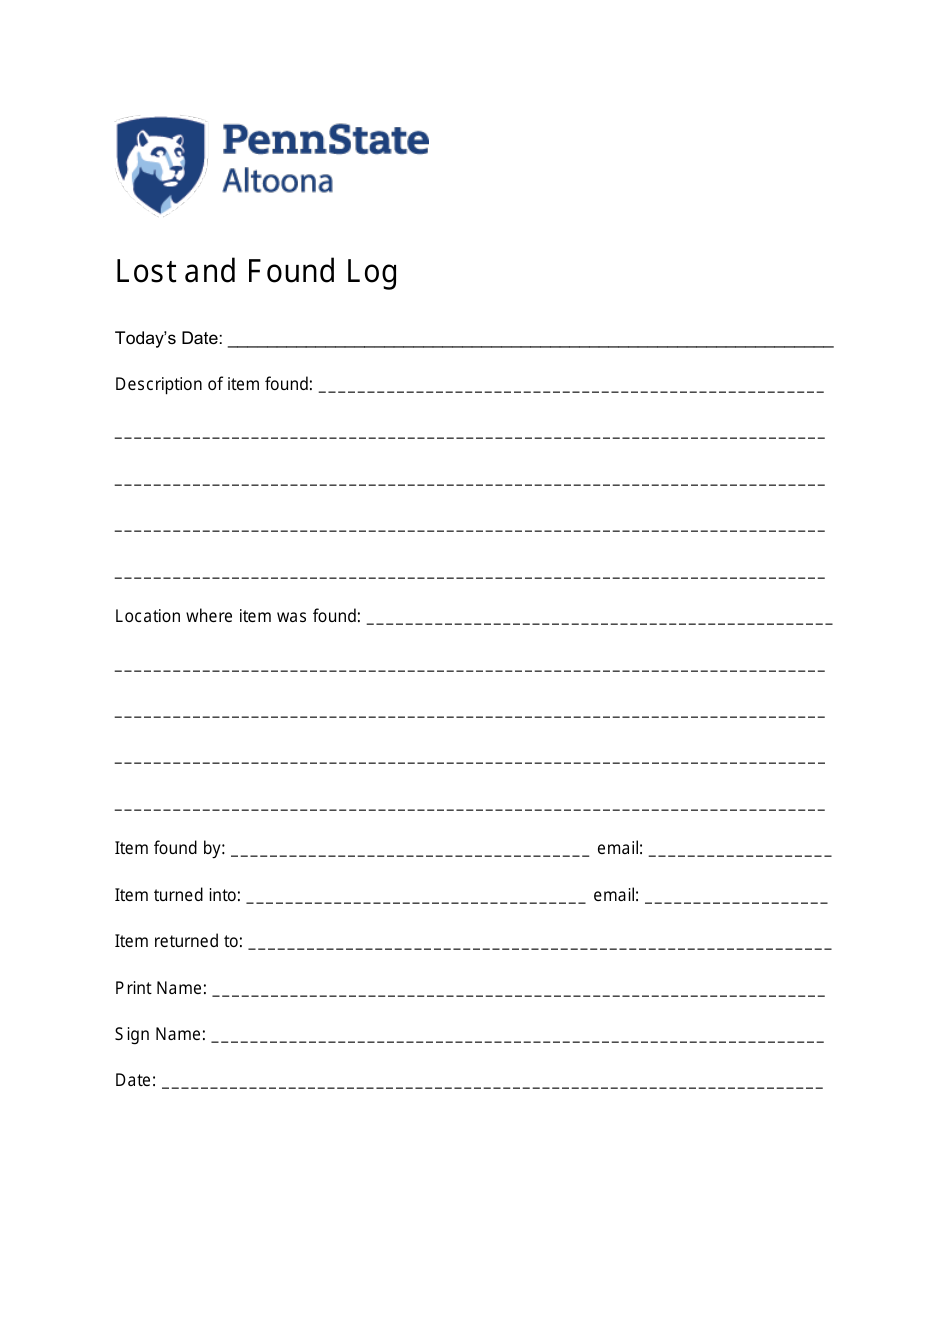 Lost and Found Log Template